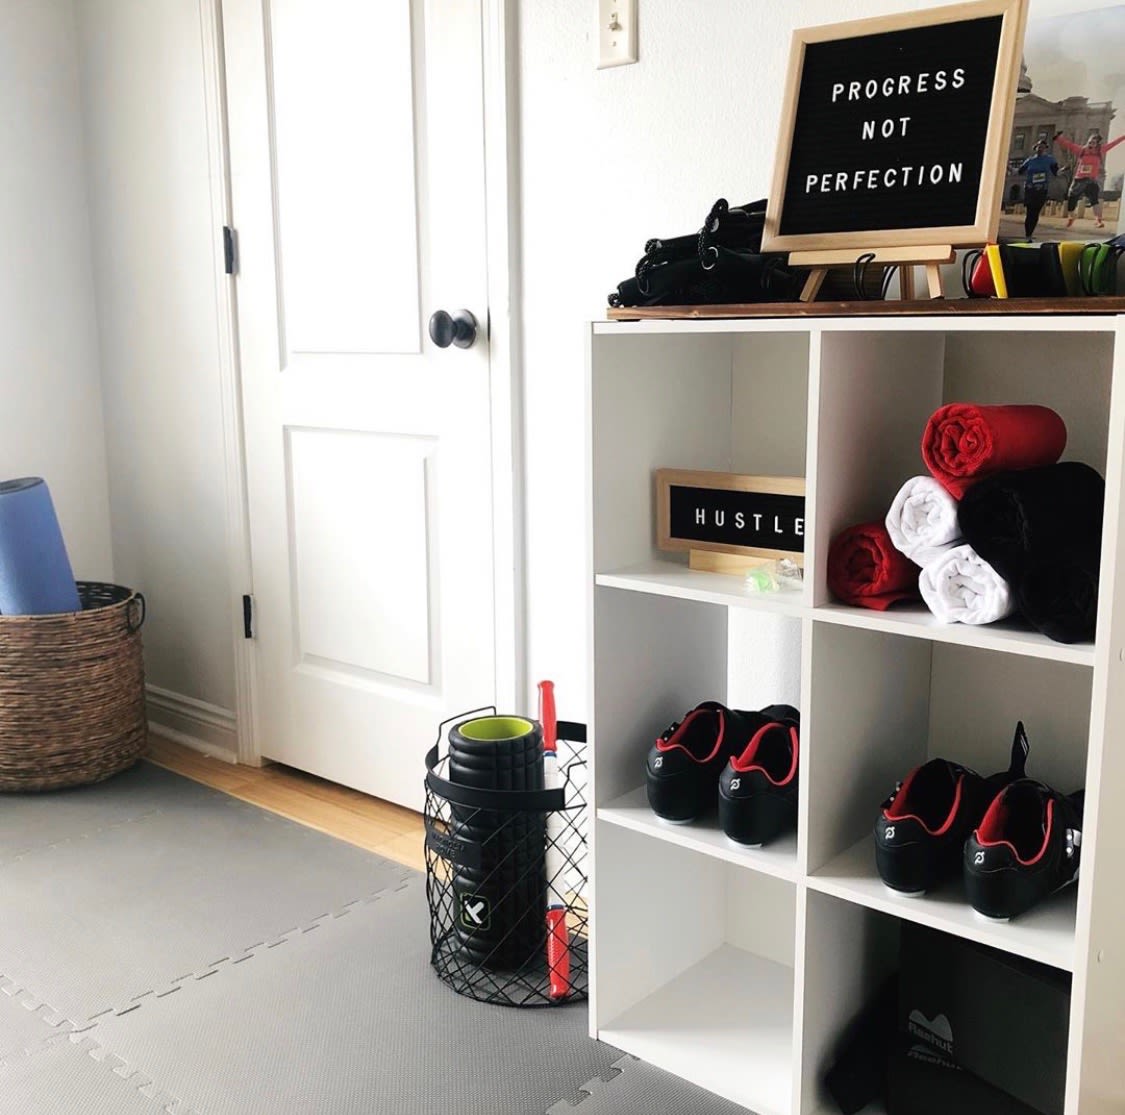 10 Home Gym Ideas to Inspire Your Fitness Goals